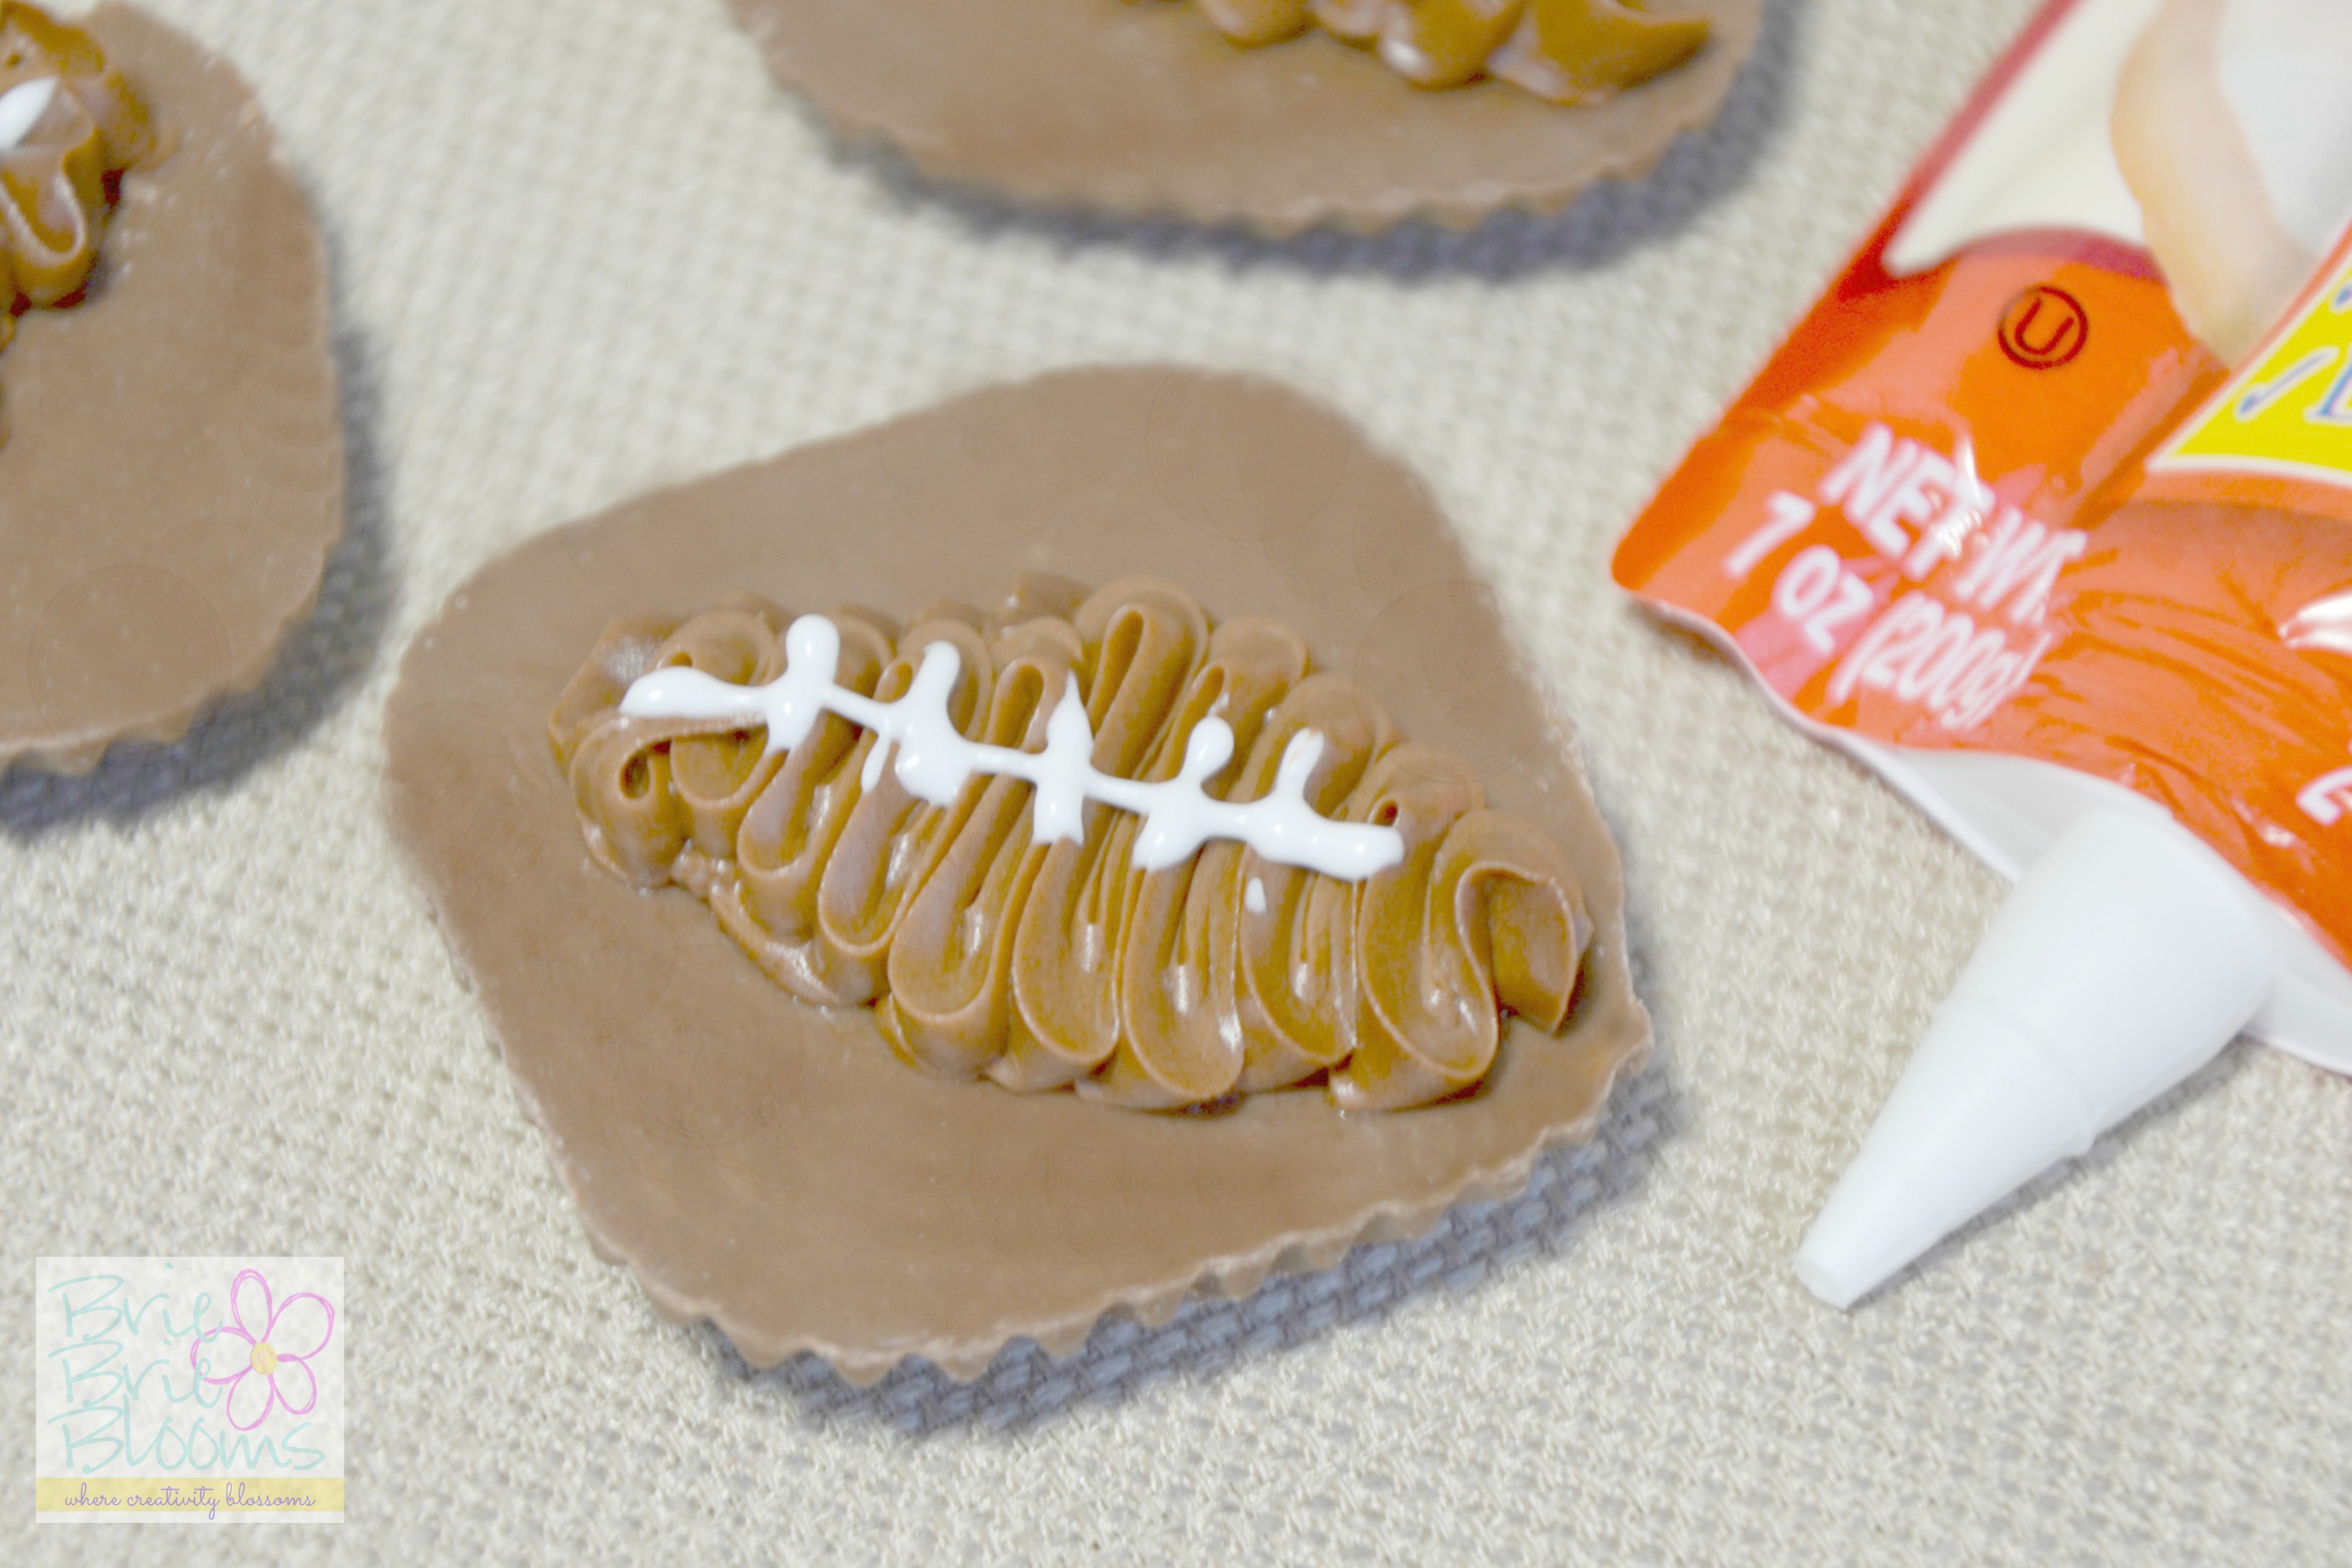 make a football with cookie frosting #thatnewcrush #shop #cbias